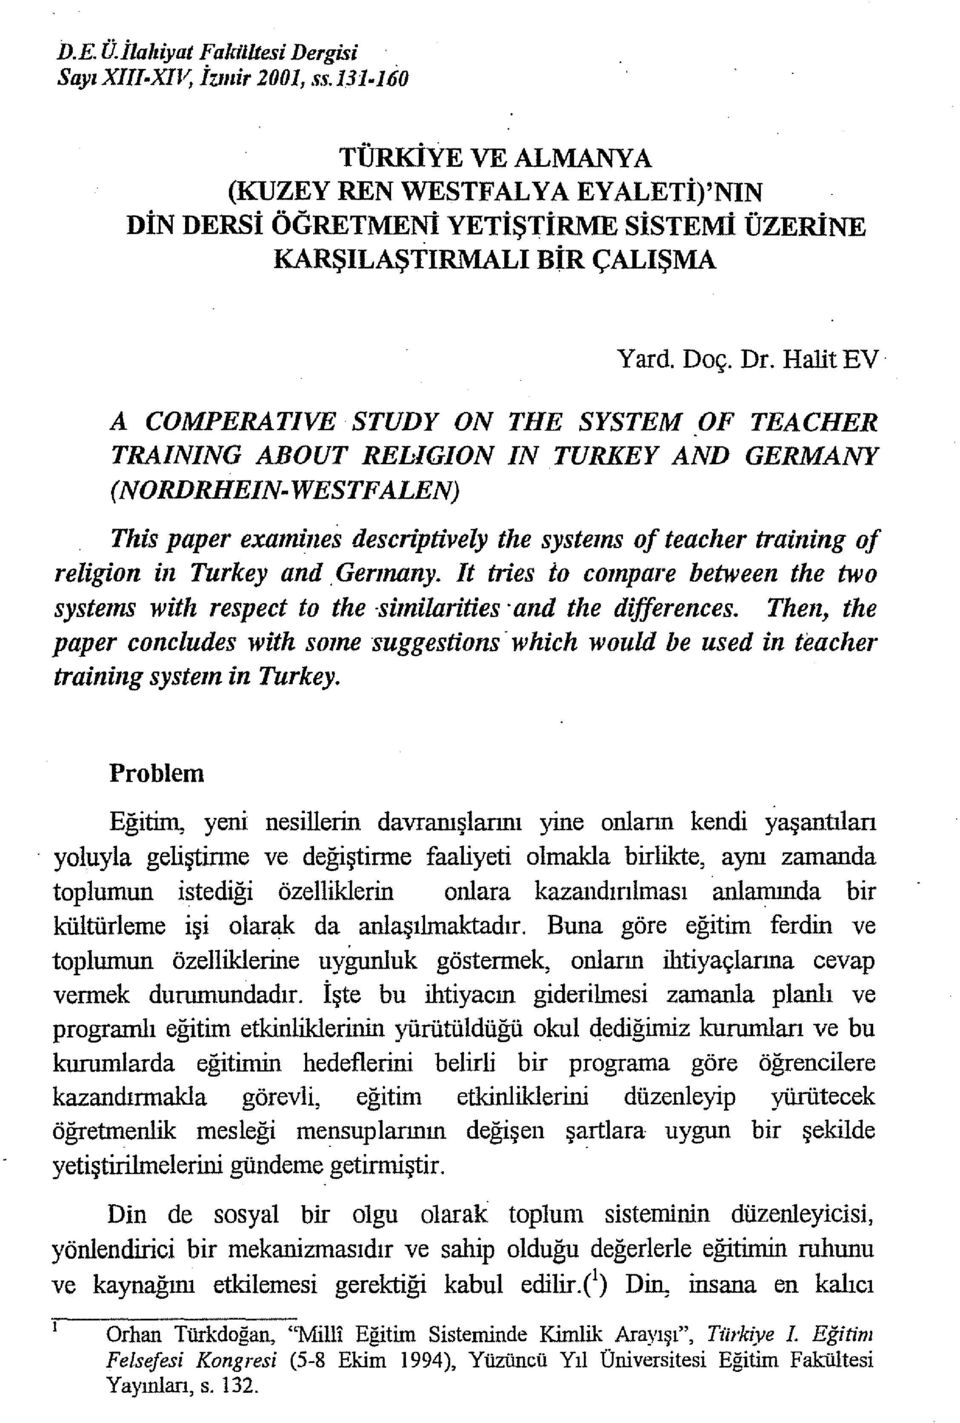 Halit EV A COMPERAT/VE STUDY ON THE SYSTEM OF TEACHER TRAINING ABOUT REI.